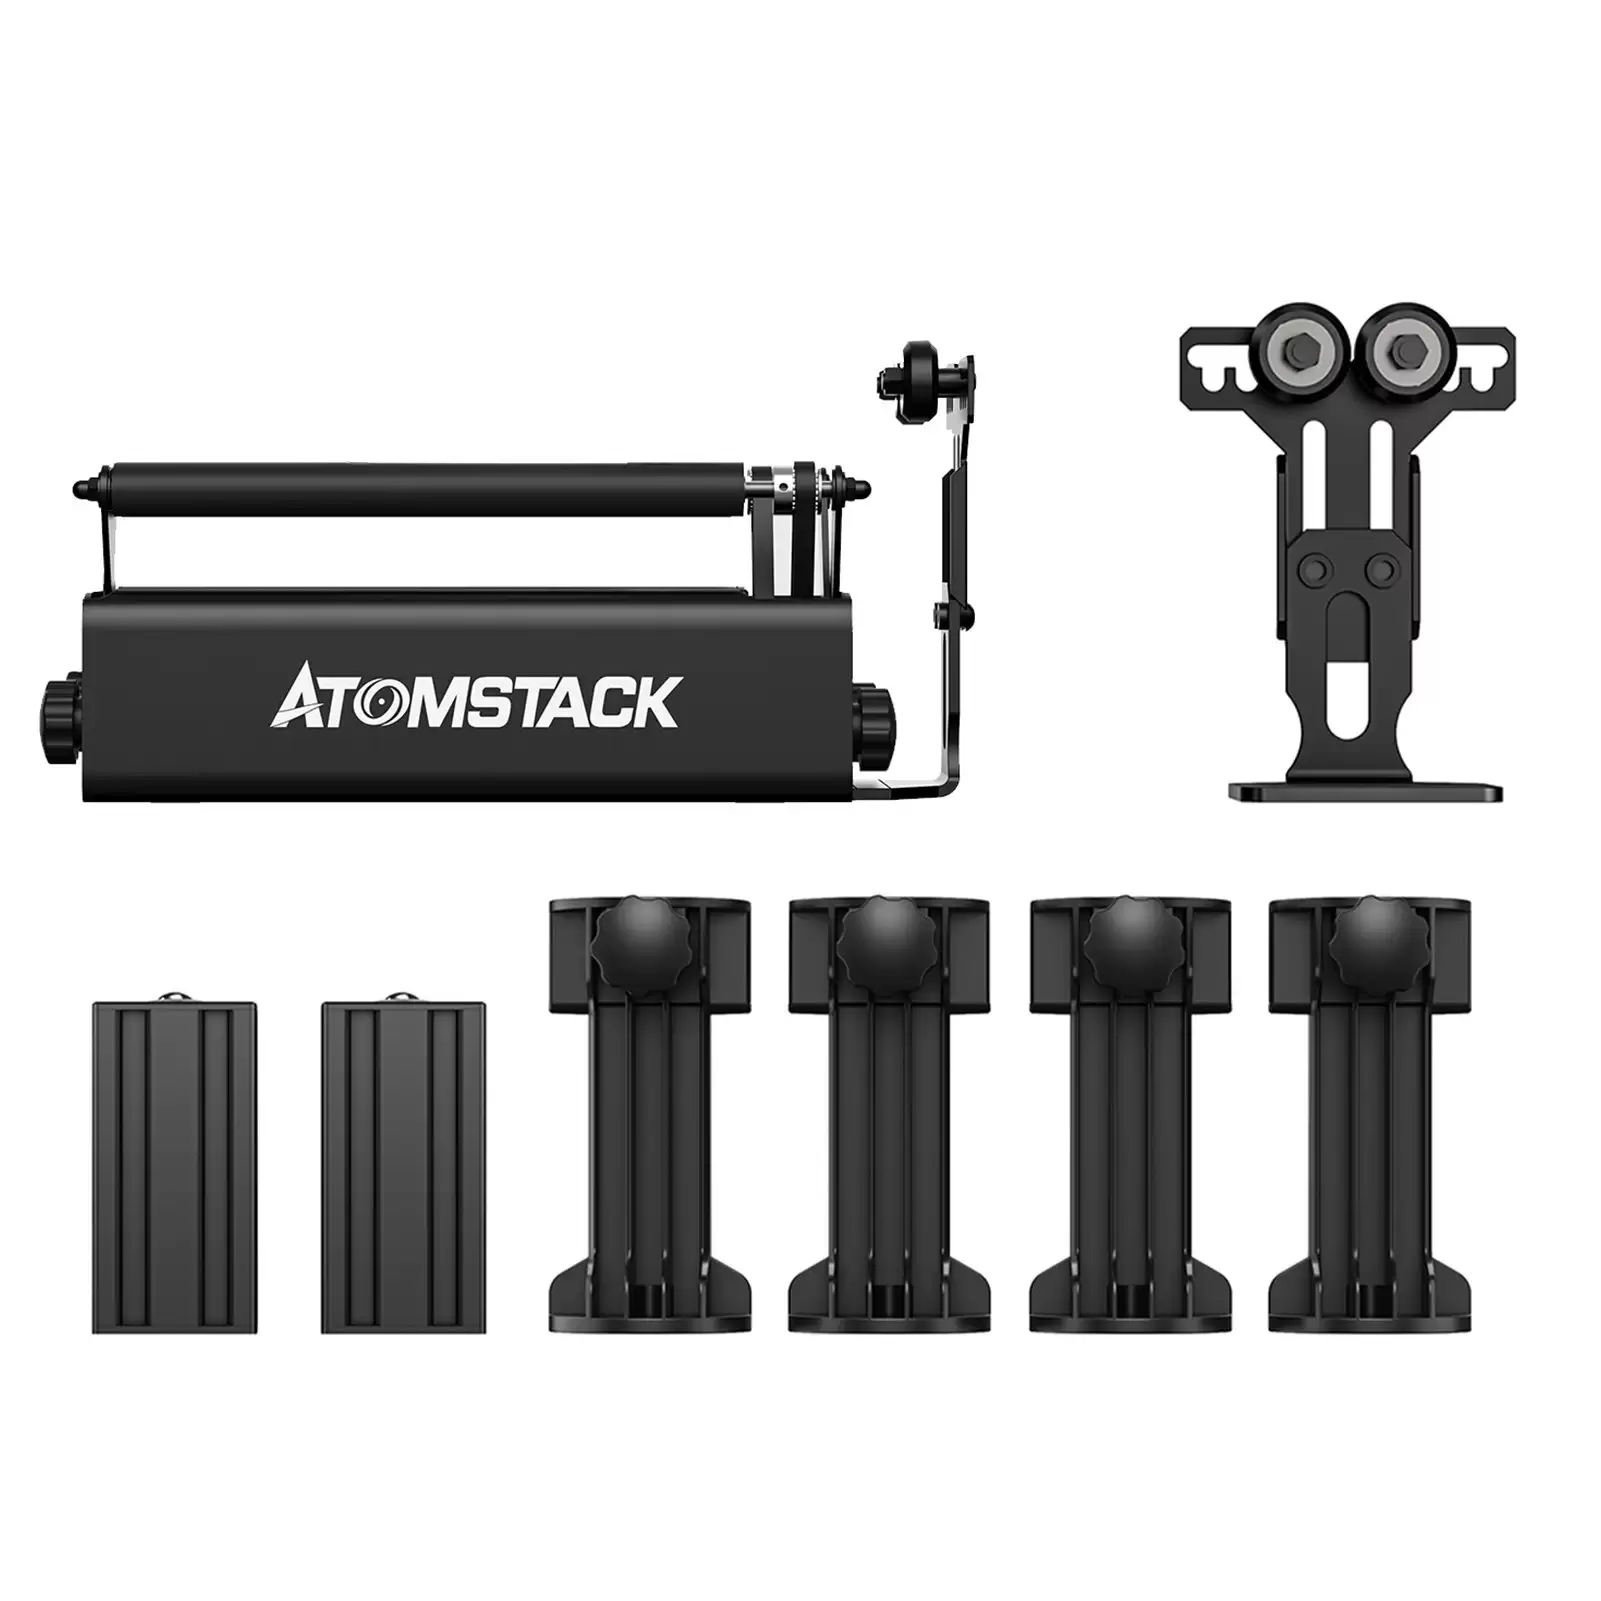 Get Extra 52% Discount On Atomstack R3 Pro Roller For Cylindrical Irregular Objects At Tomtop